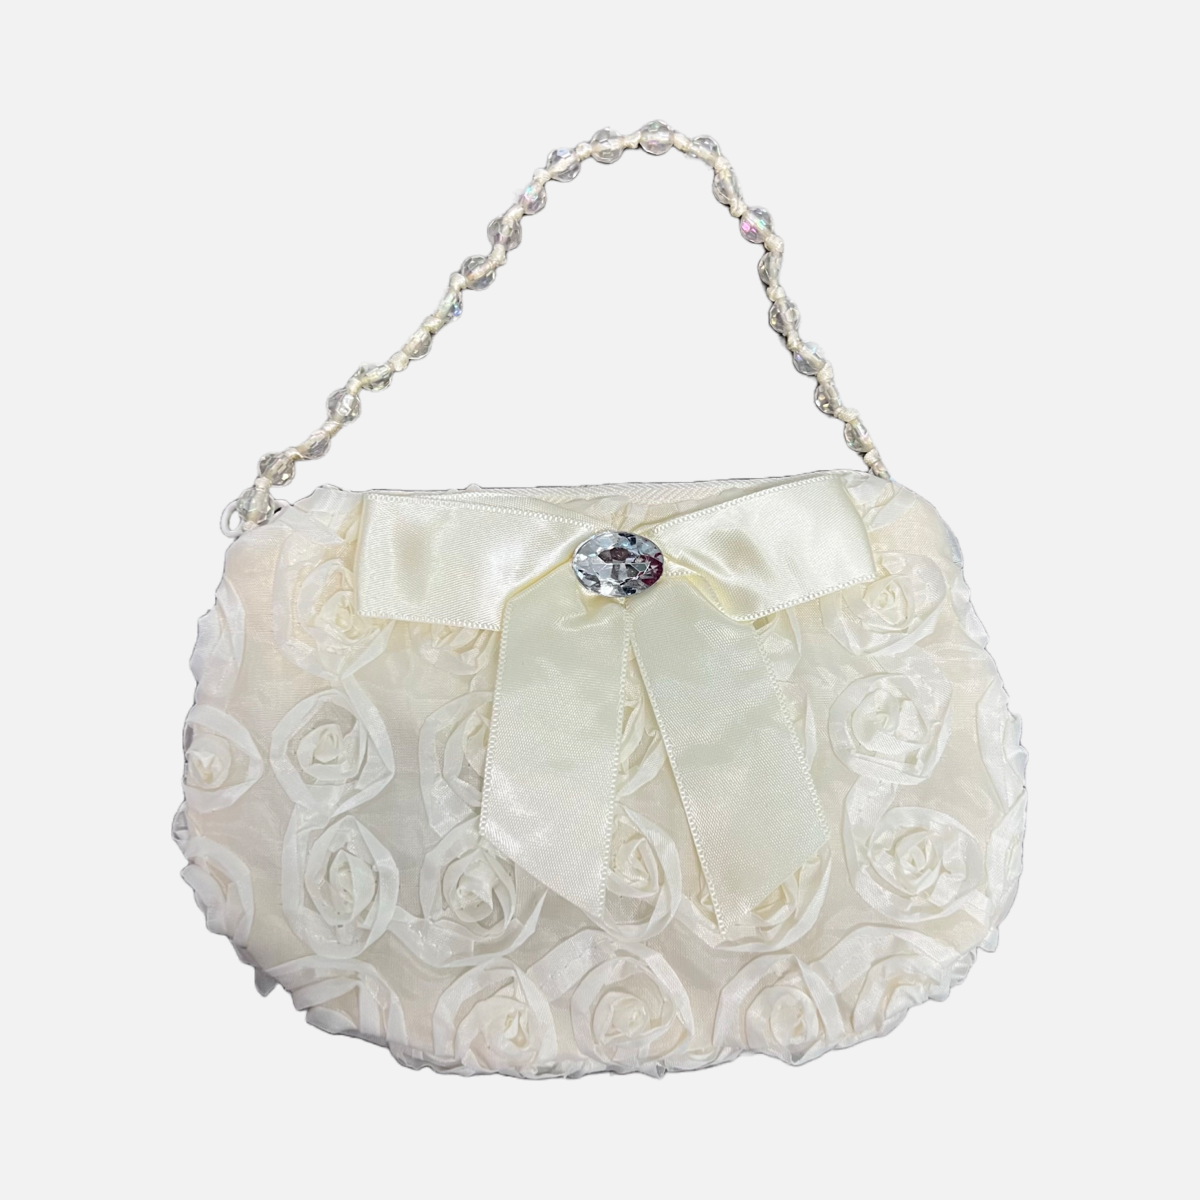 Rosette Purse with Bow